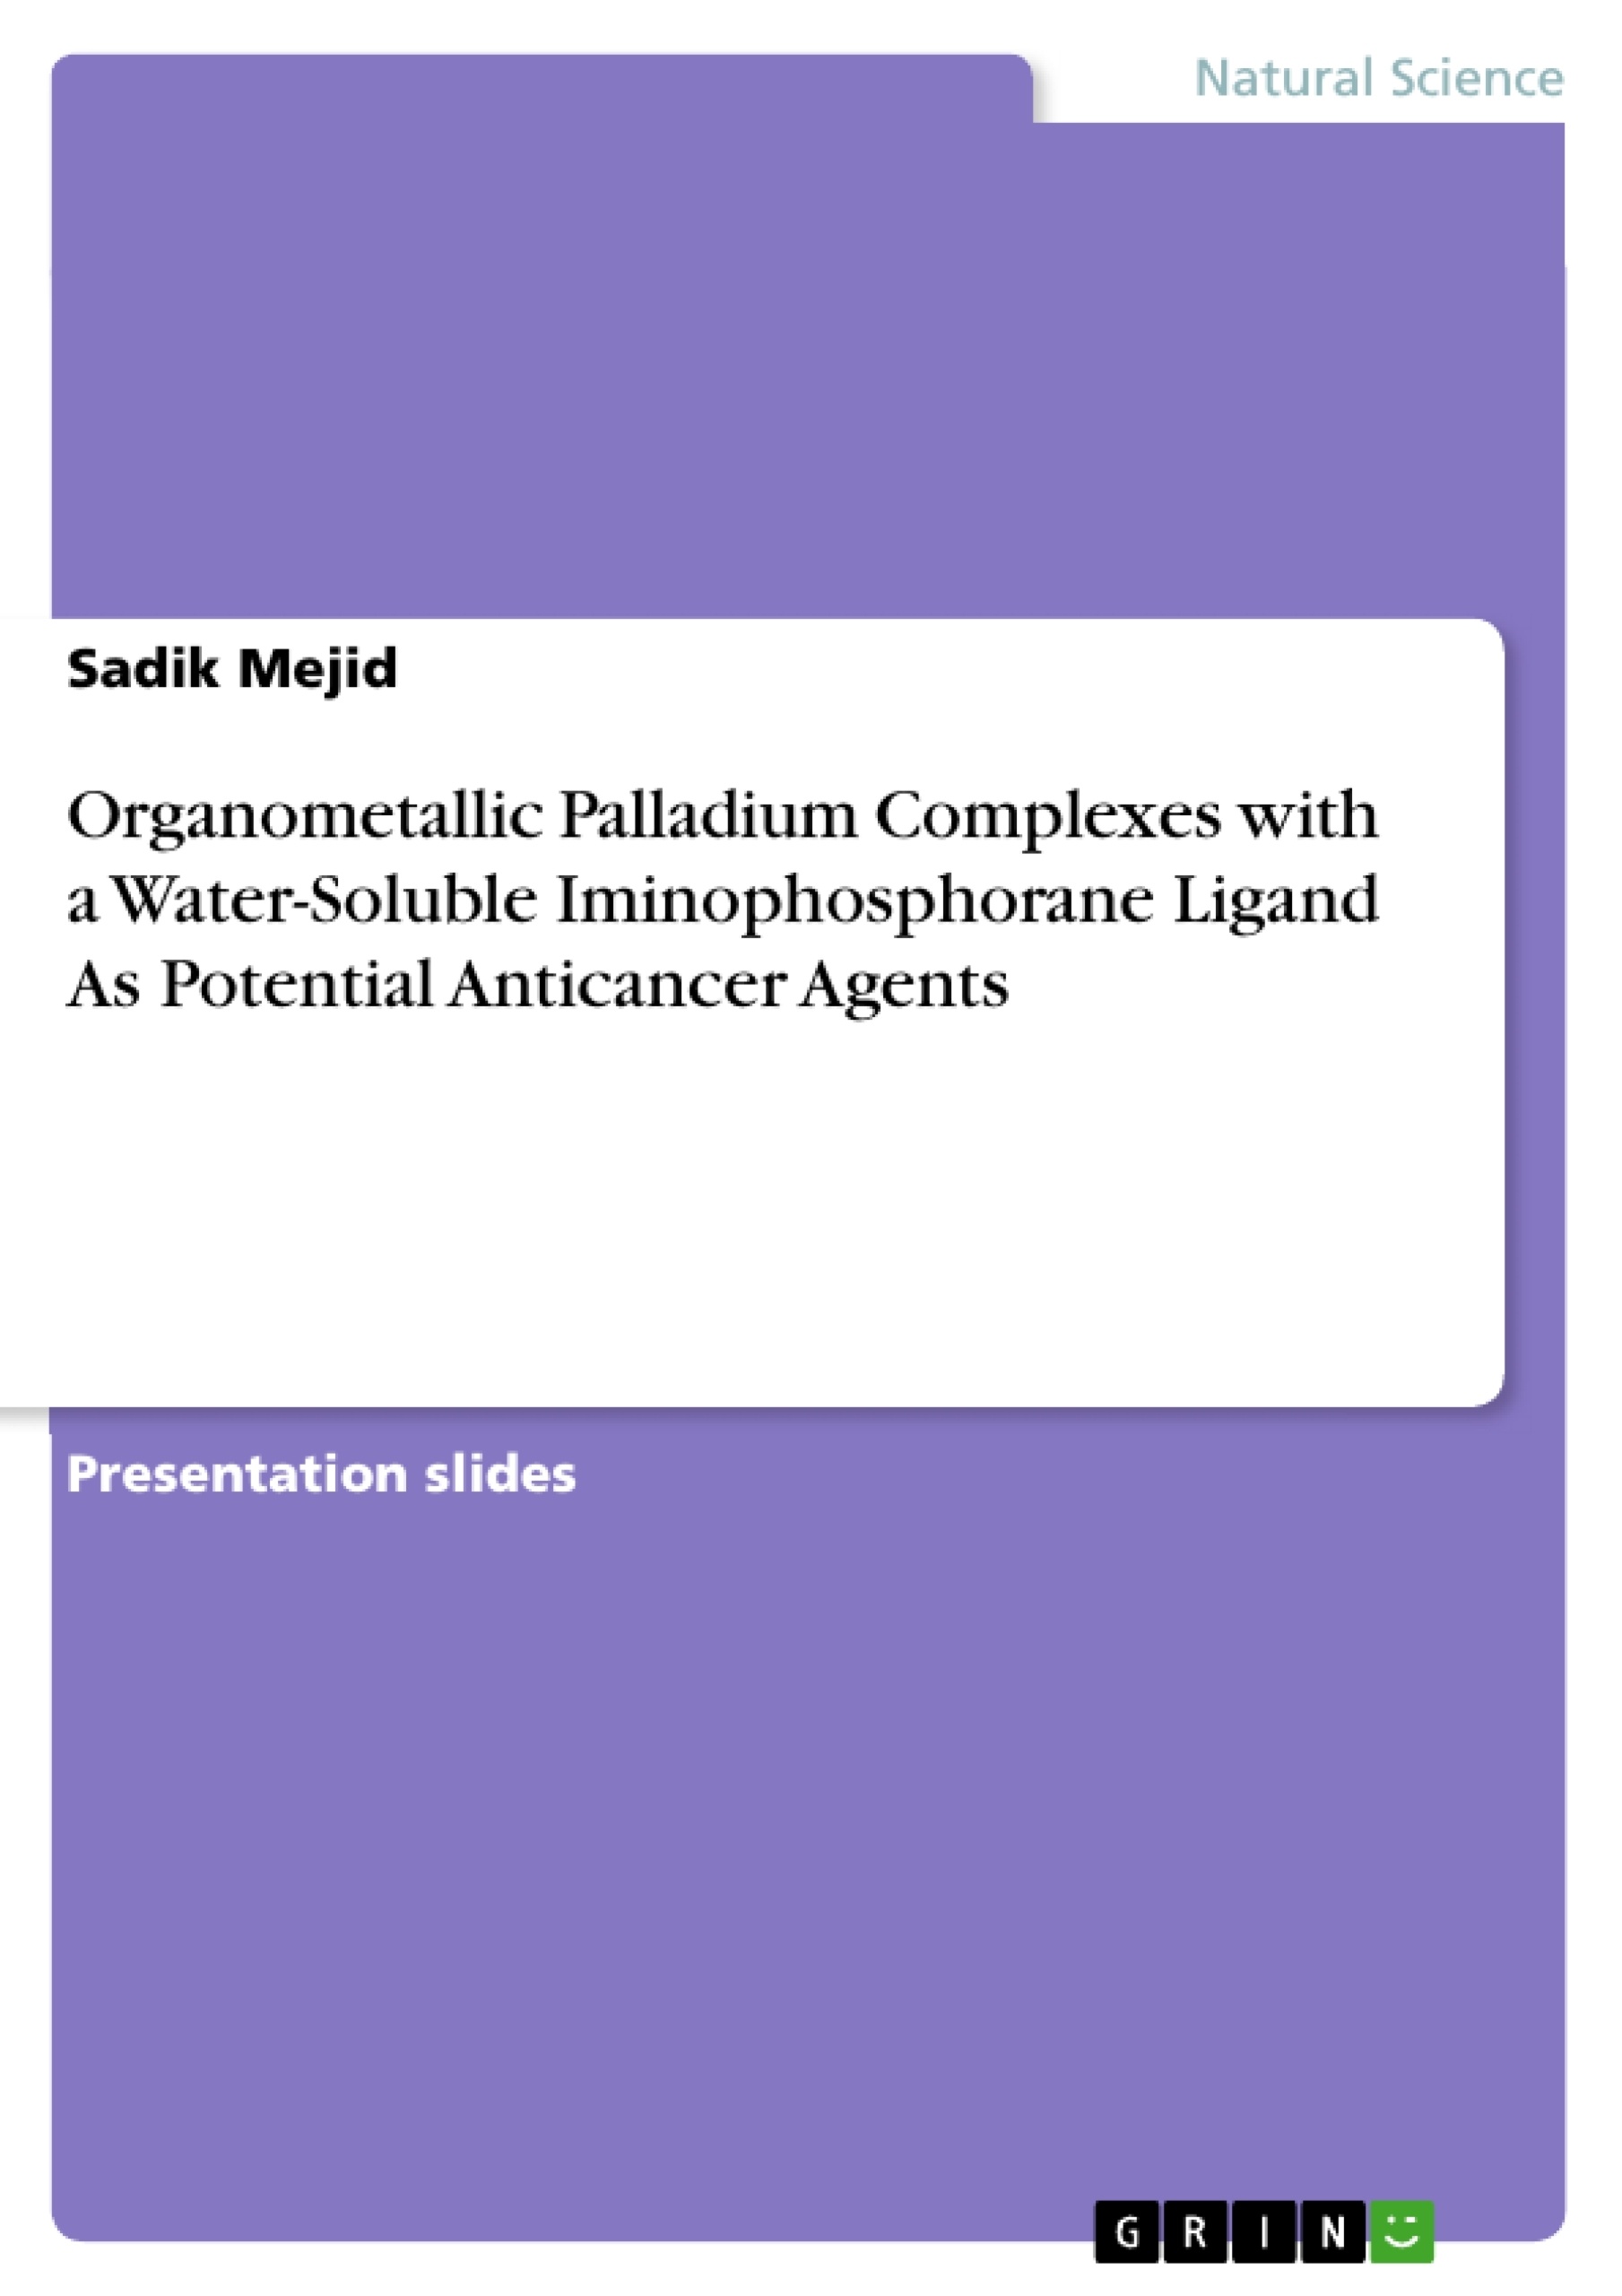 Title: Organometallic Palladium Complexes with a Water-Soluble Iminophosphorane Ligand As Potential Anticancer Agents